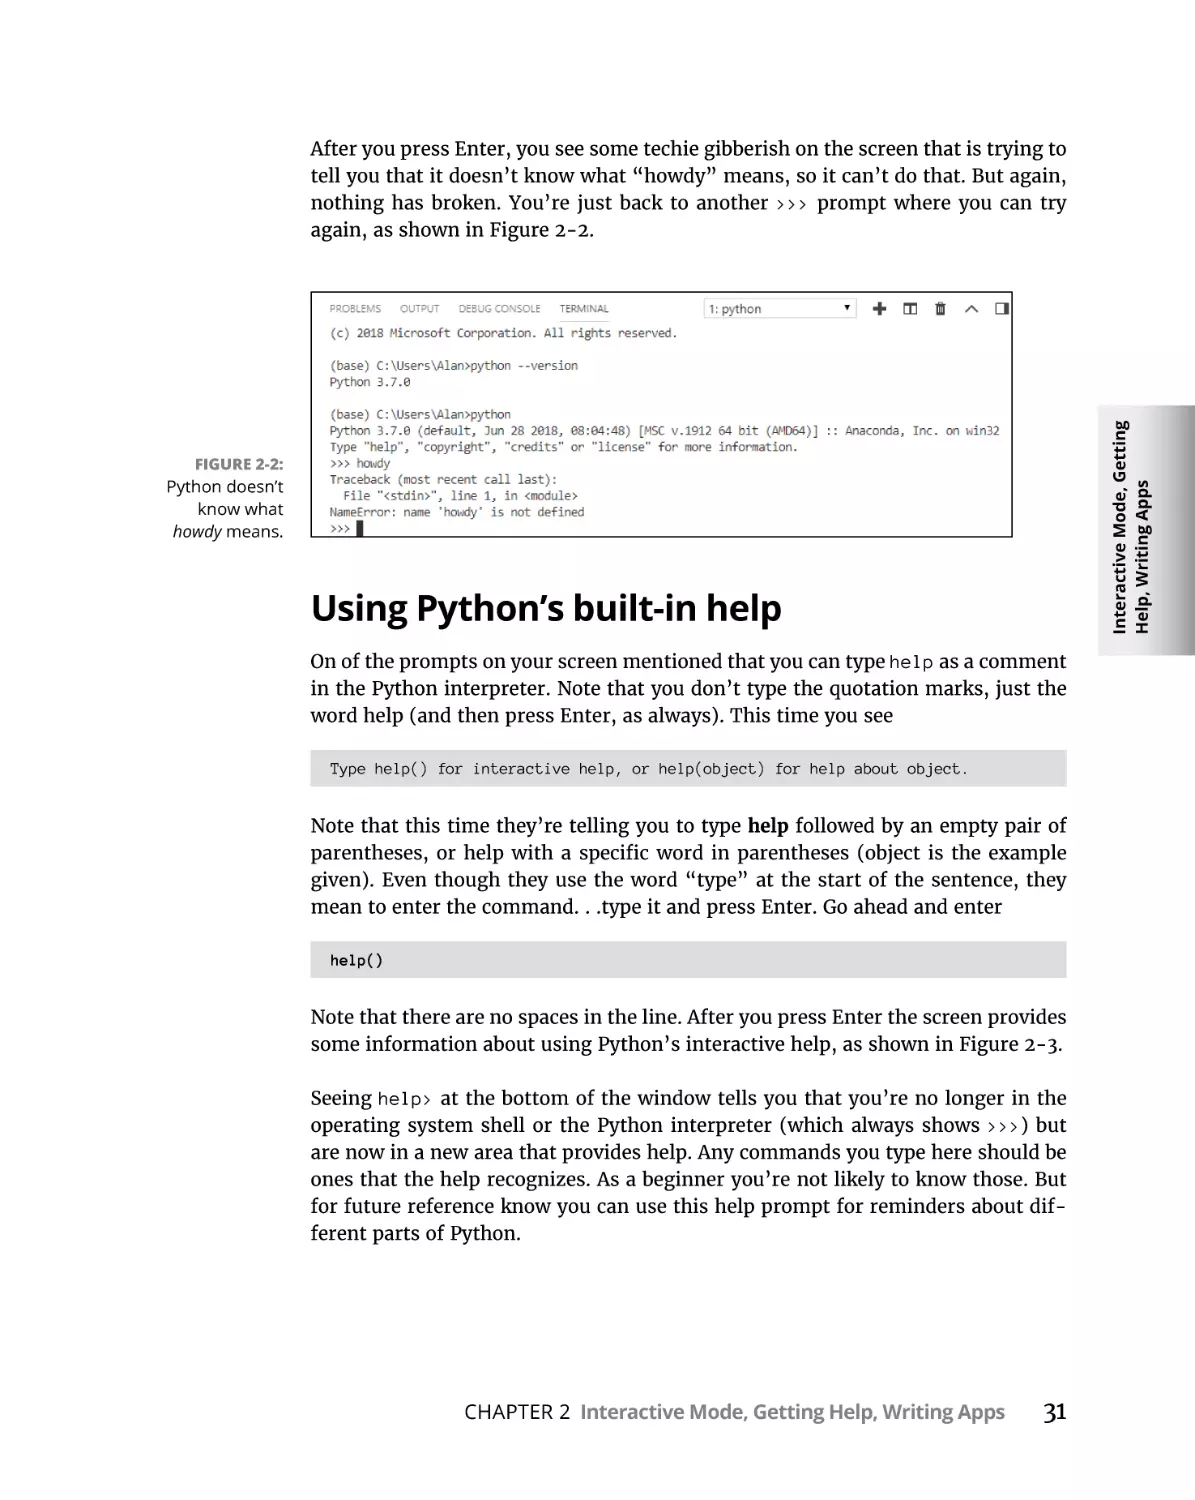 Using Python’s built-in help